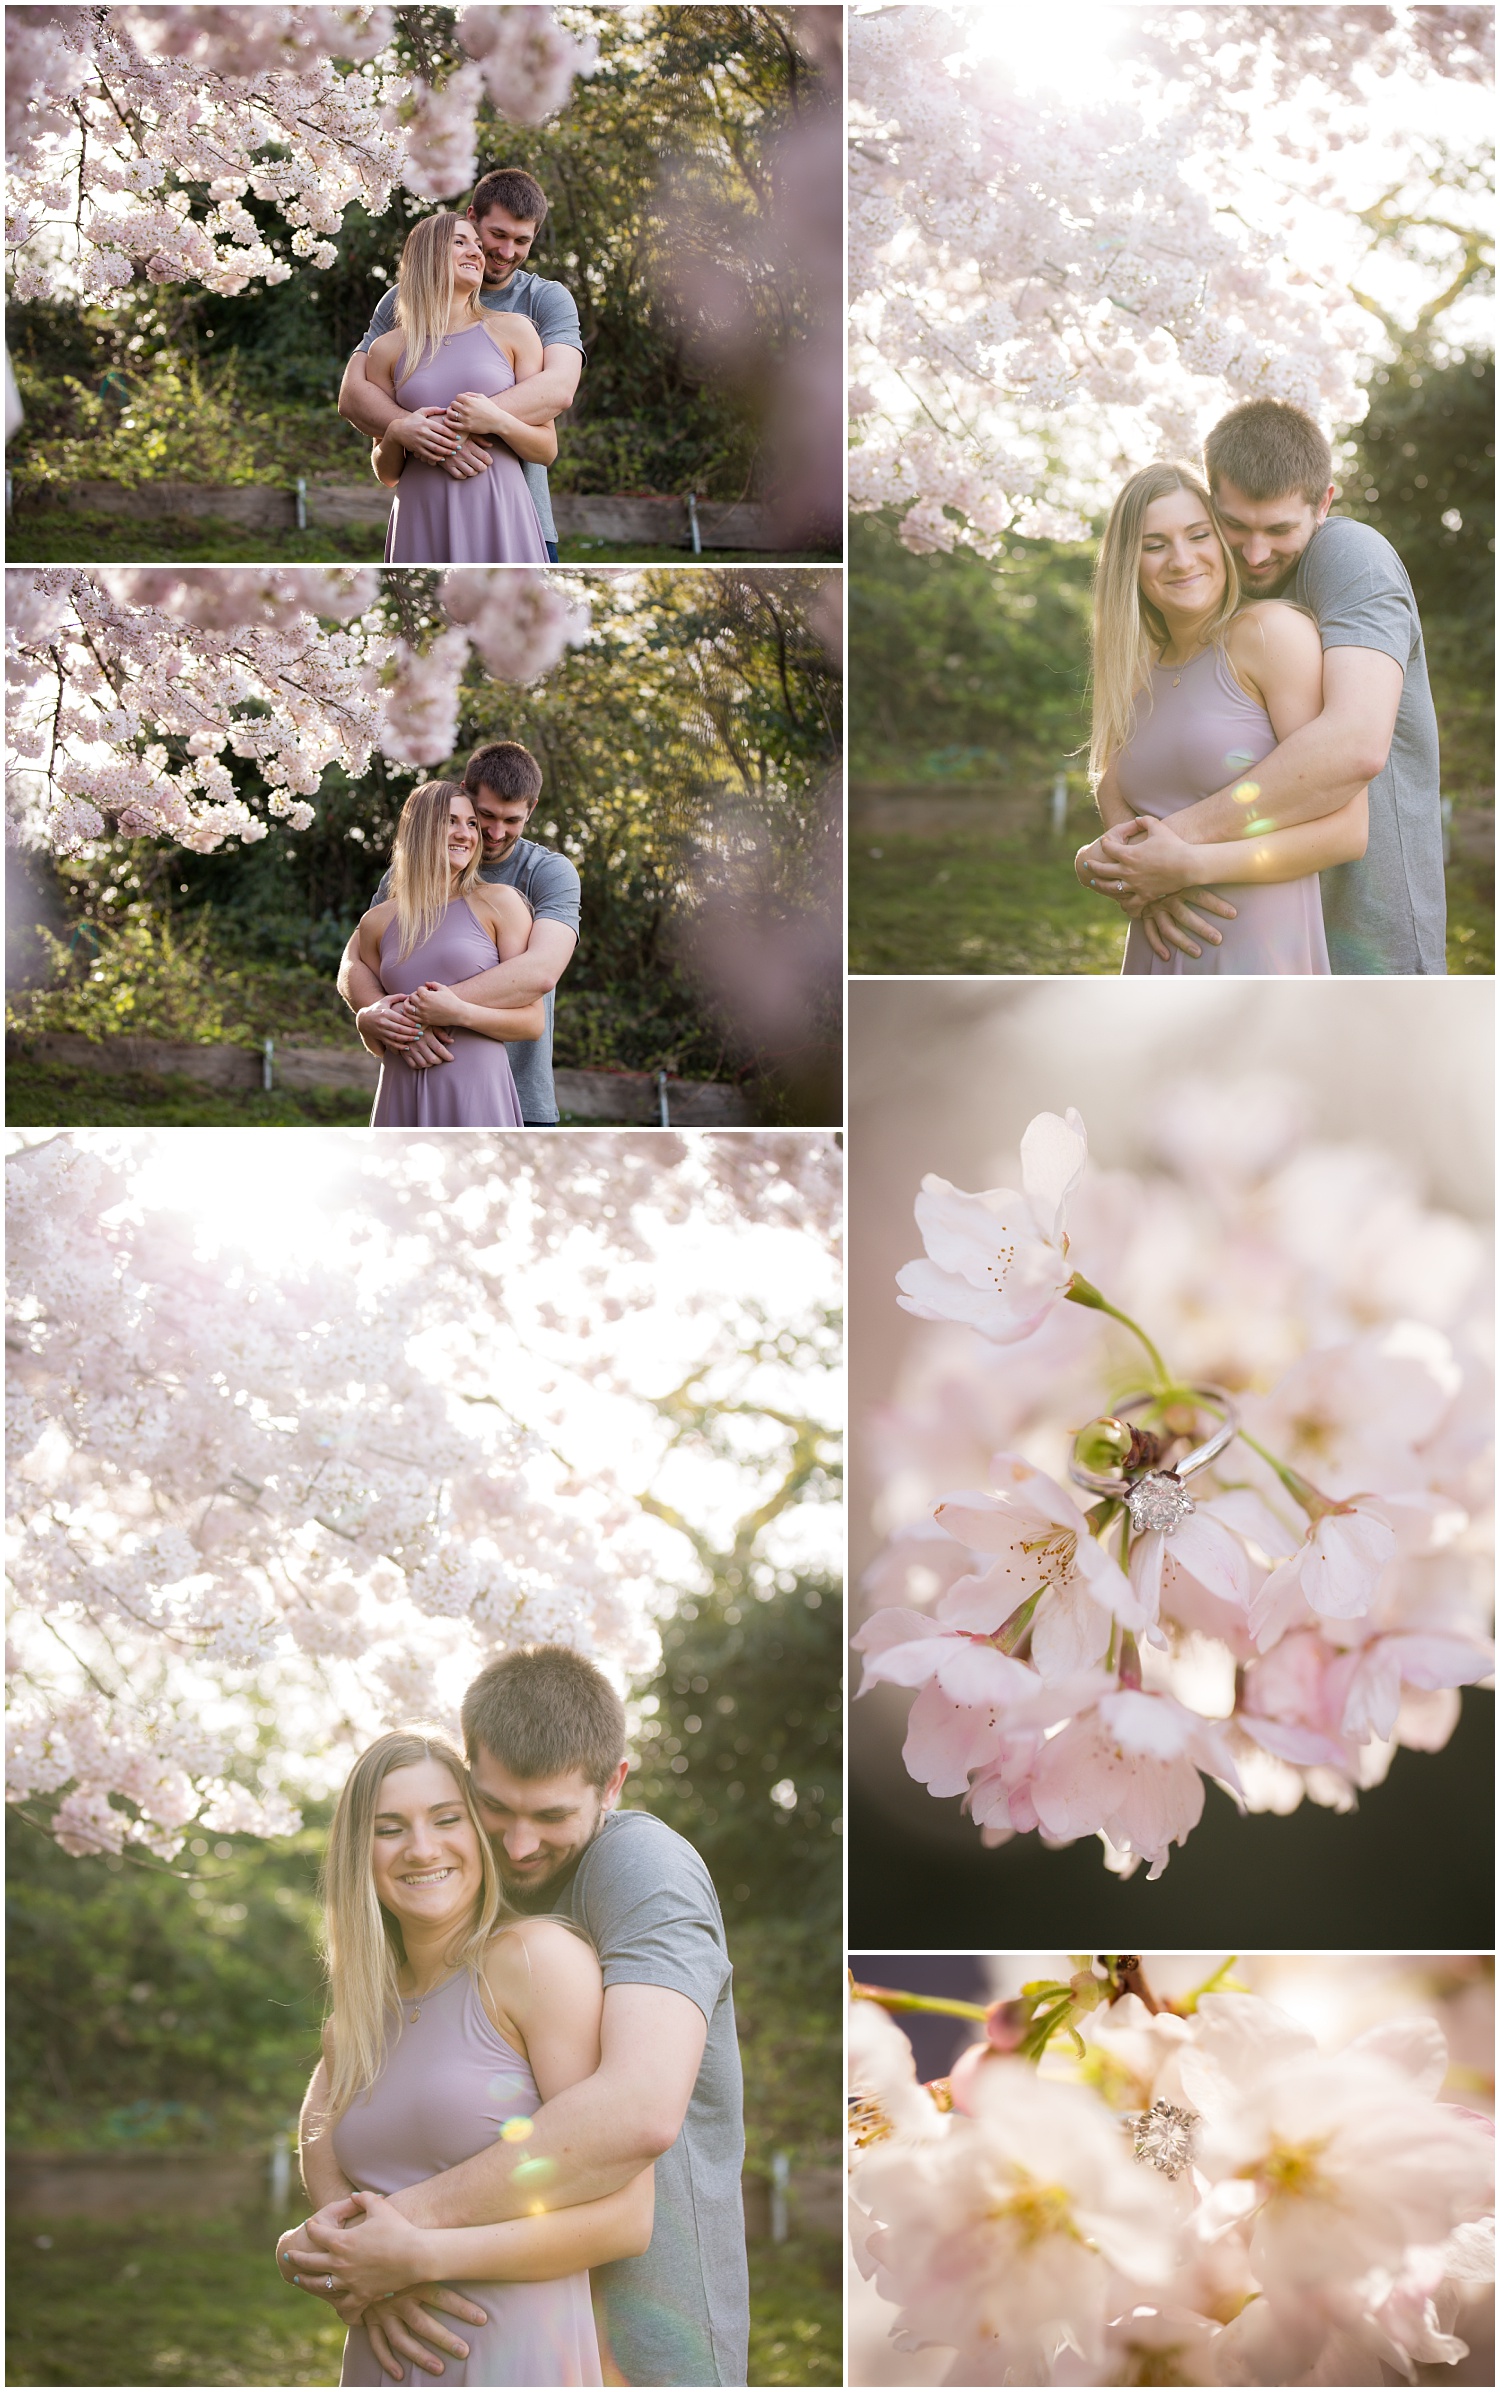 Amazing Day Photography - Cherry Blossom Engagement Session - Queen Elizabeth Park Engagement Session - Vancouver Engagement Photographer  (2).jpg